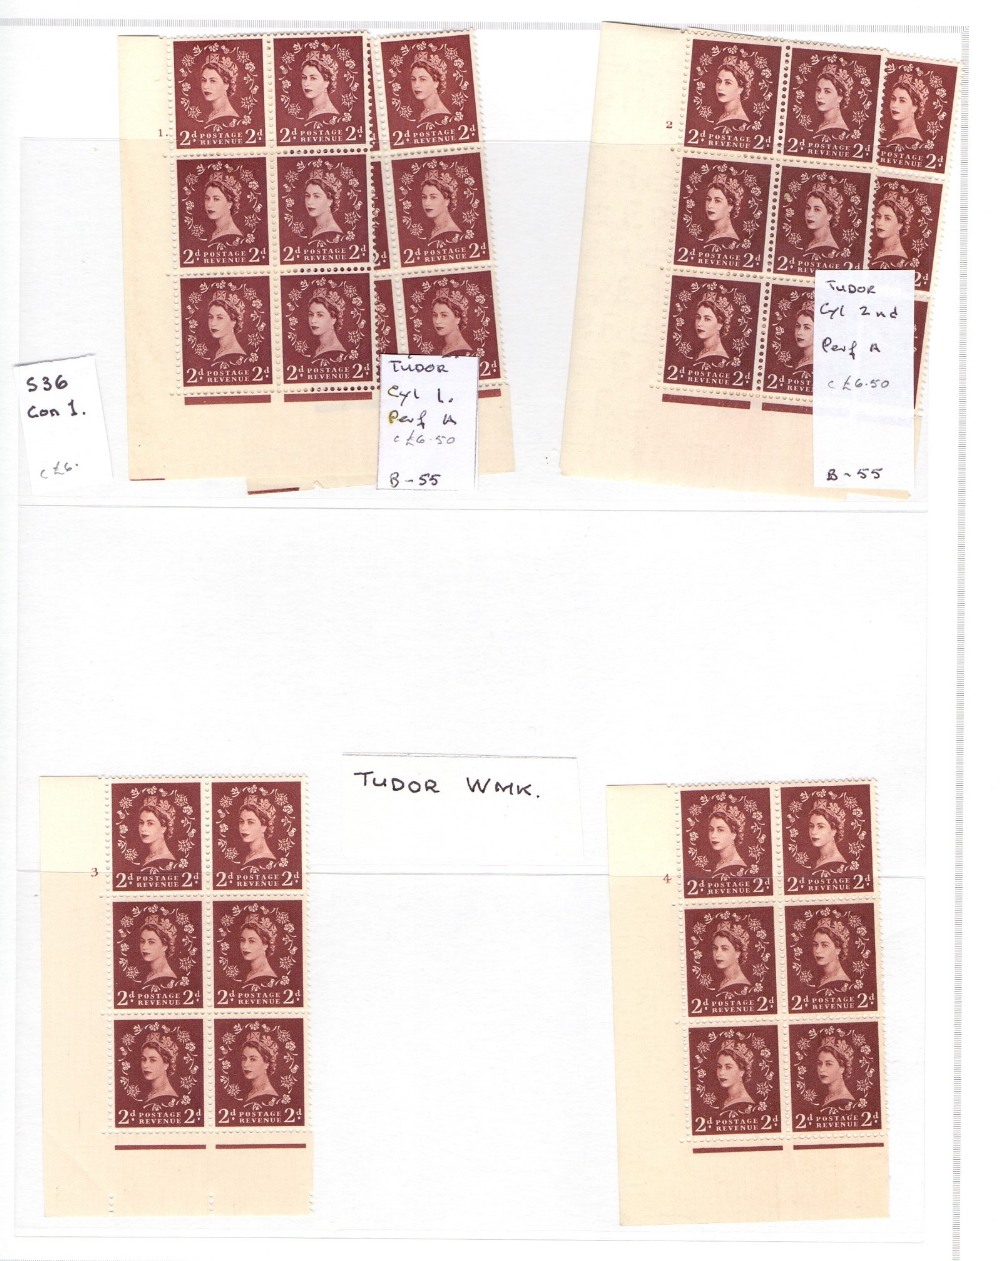 GREAT BRITAIN STAMPS : Wilding Collection, mint cylinder blocks, coils, singles, - Image 4 of 18